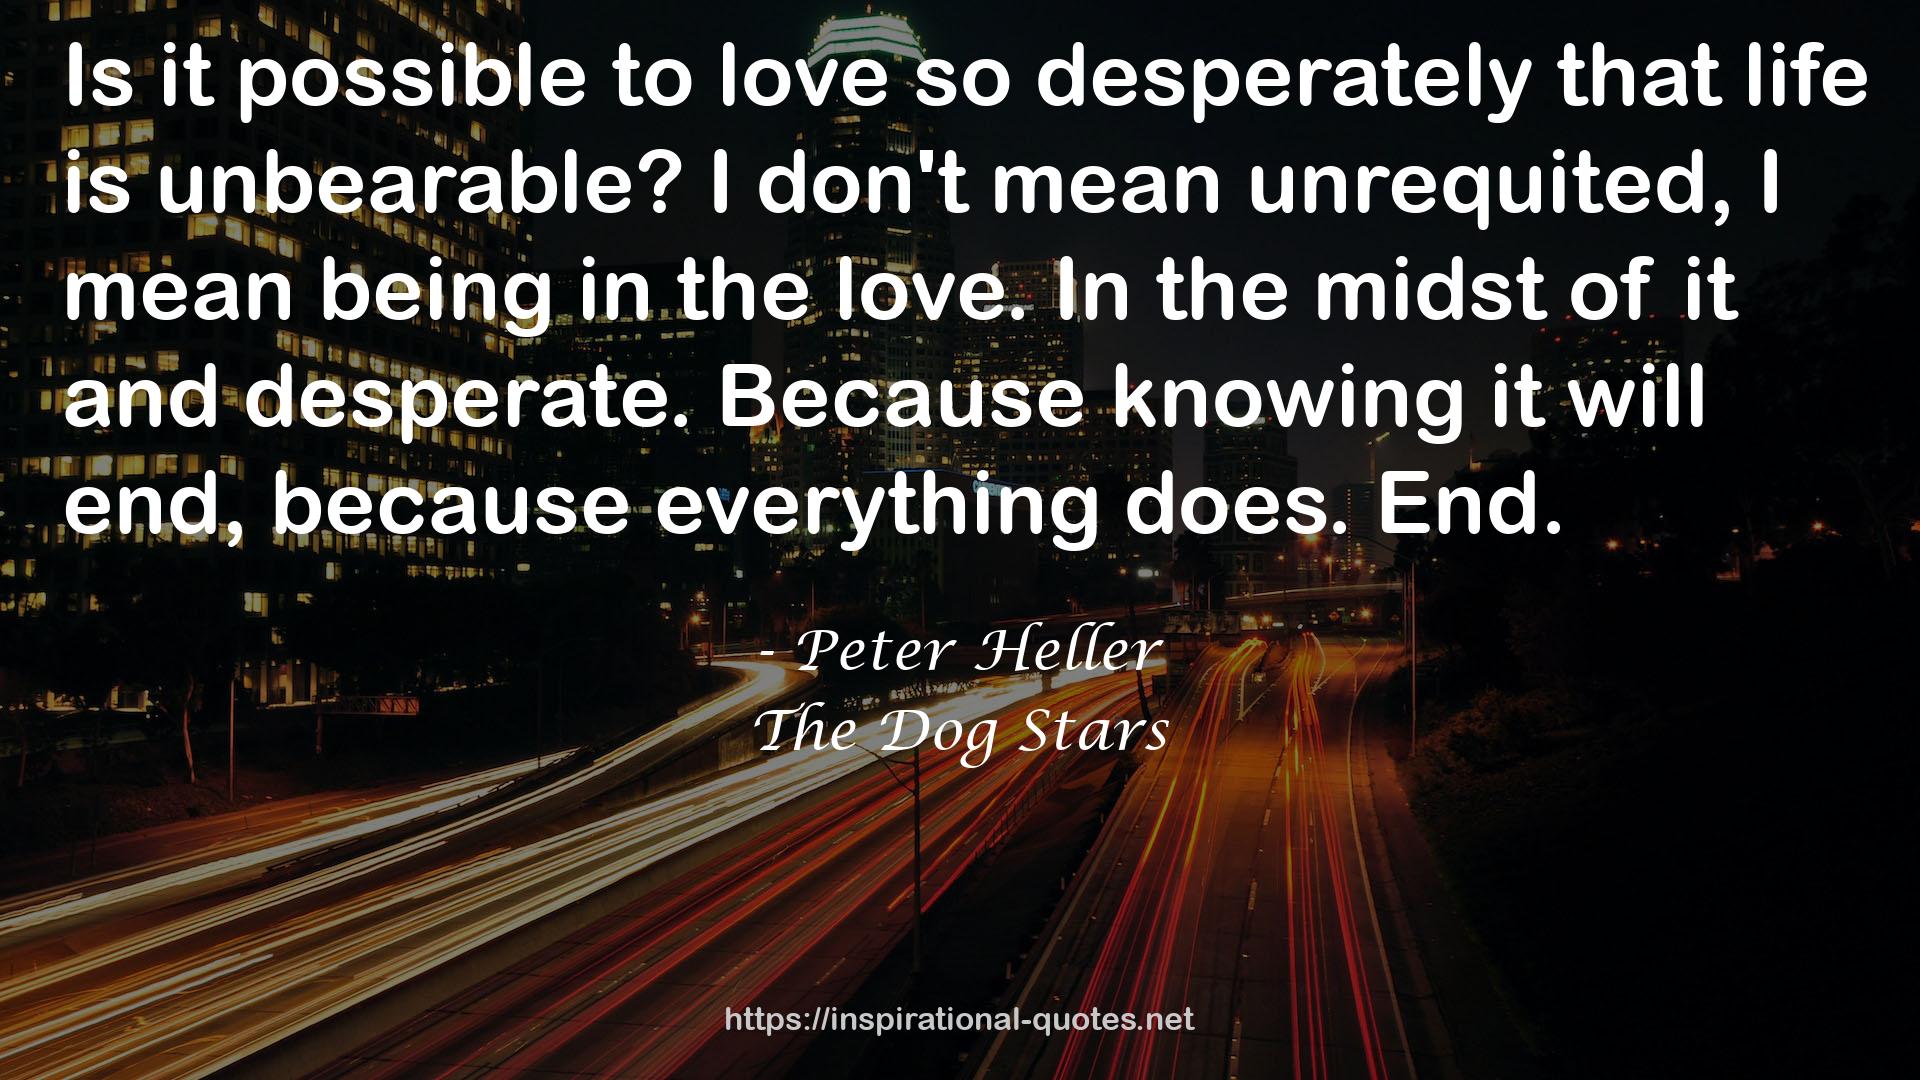 Peter Heller QUOTES